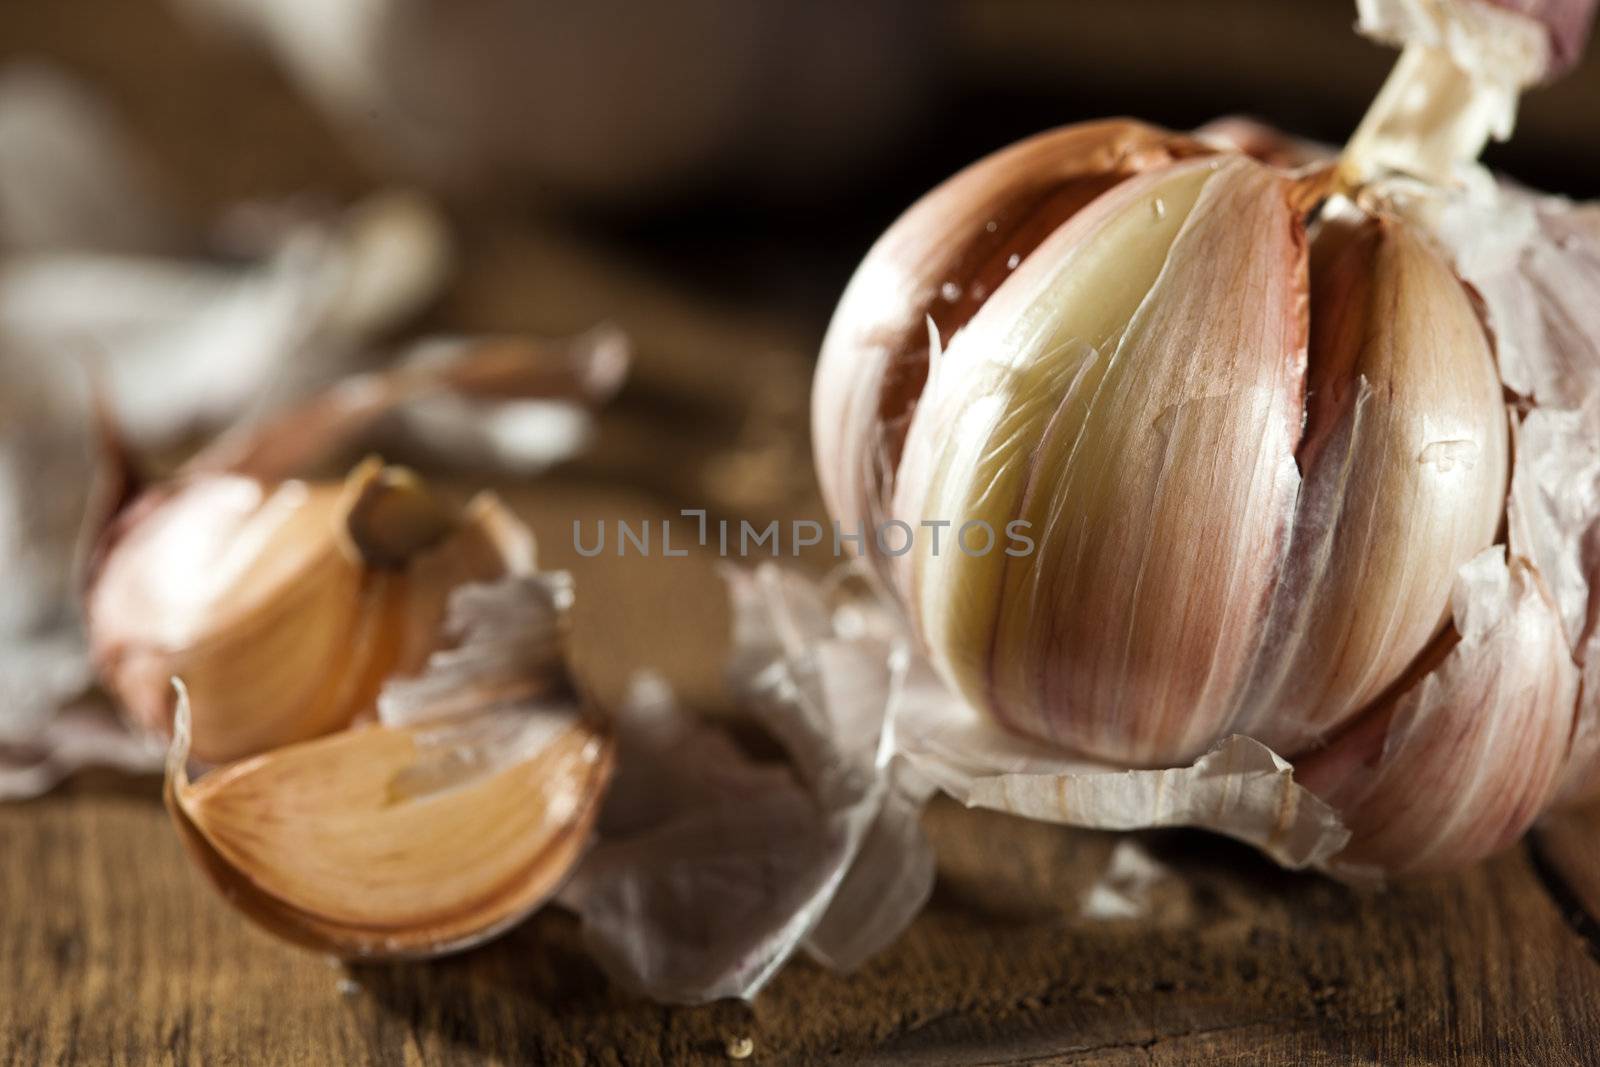 A ball of garlic with some cloves lying next to it on wood